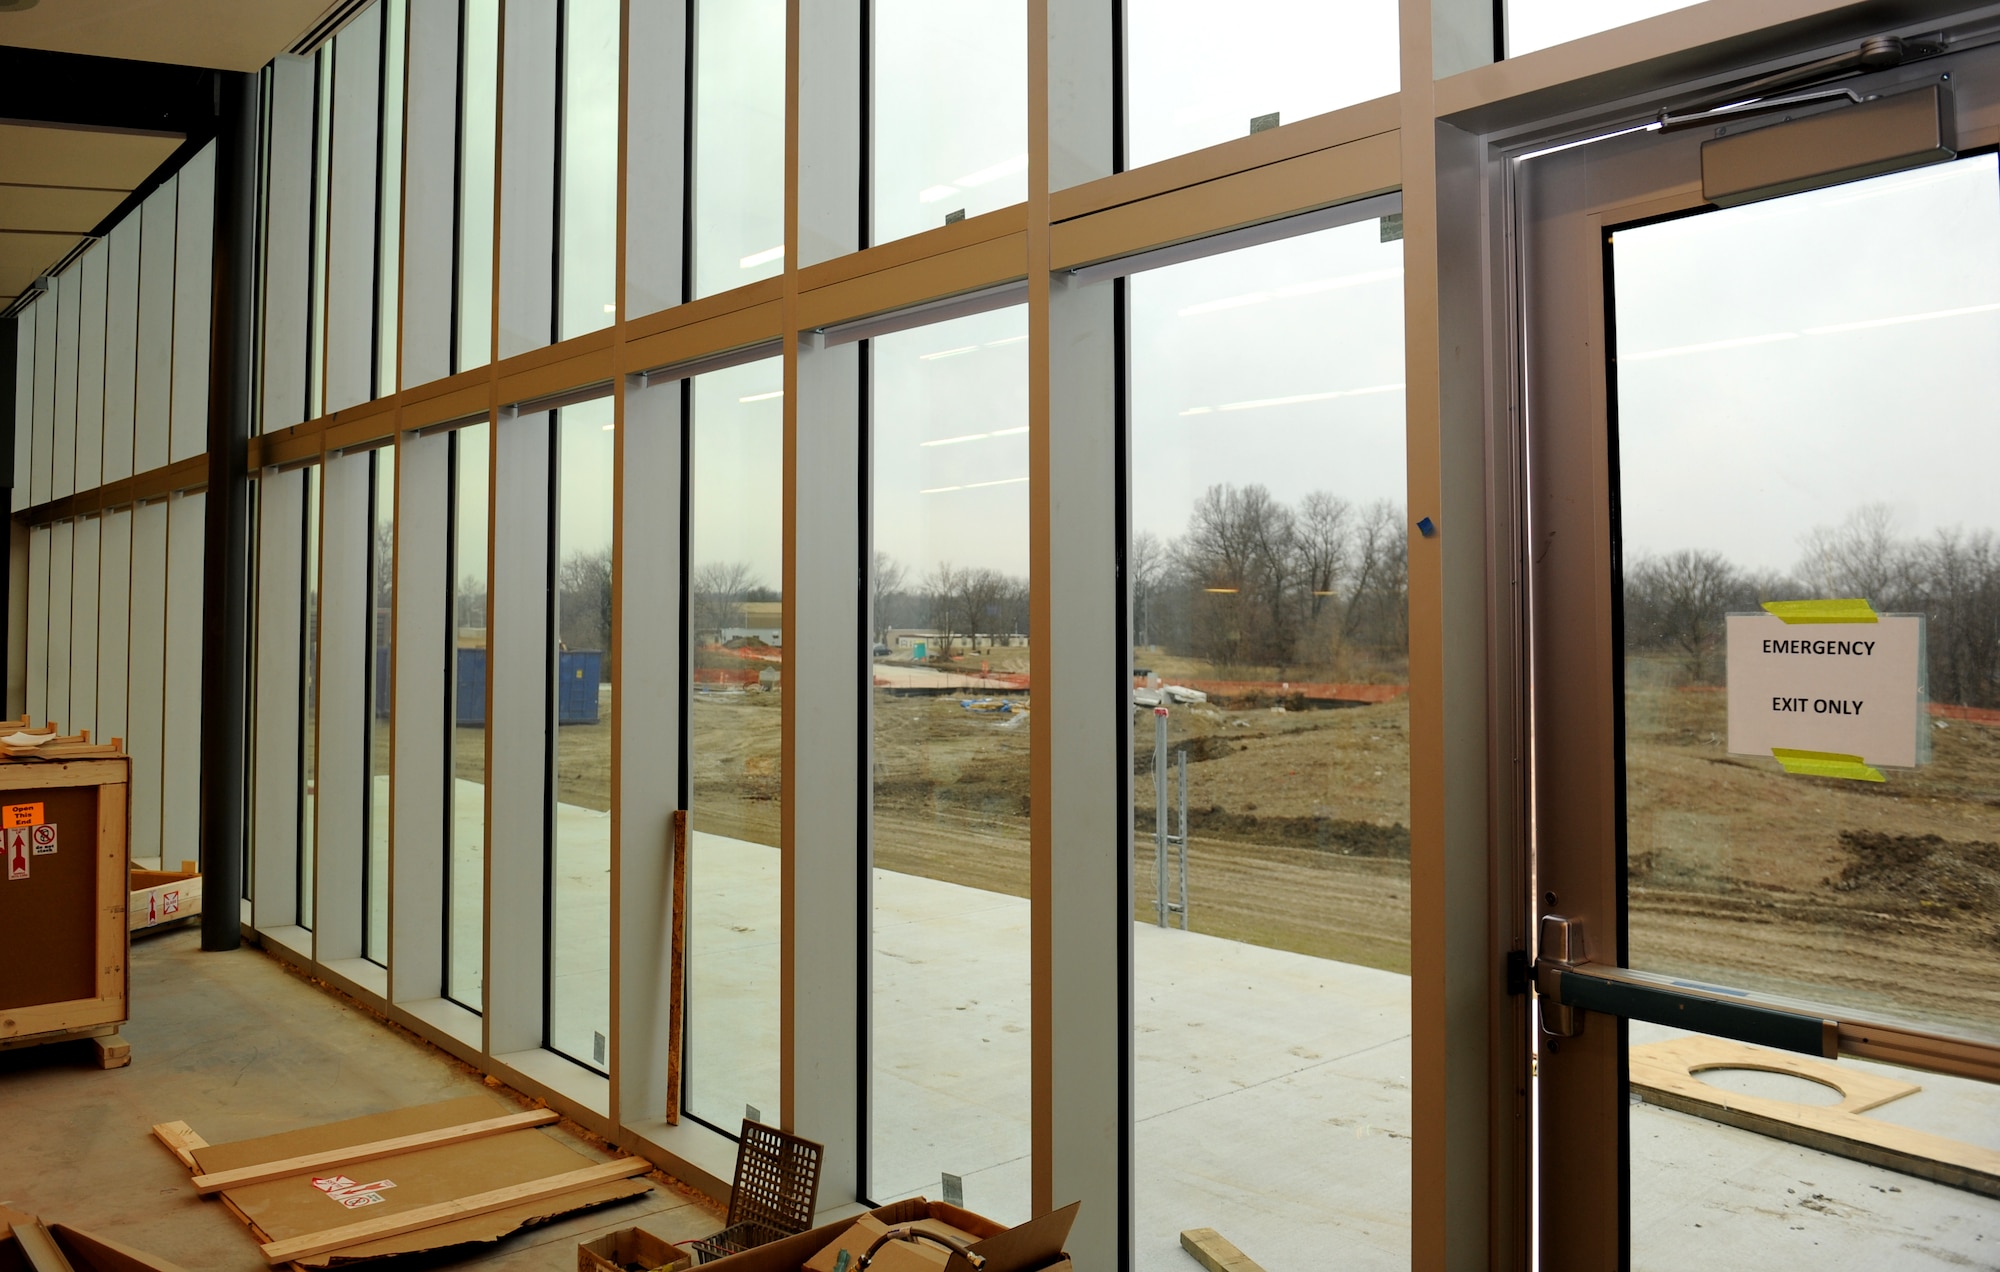 Daylight shines through floor to ceiling windows in the new Whiteman Bowling Center’s dining area at Whiteman Air Force Base, Mo., Feb. 23, 2016. The new facility will have a larger dining area than the old bowling center and additional seating outside. (U.S. Air Force photo by Tech Sgt. Miguel Lara)